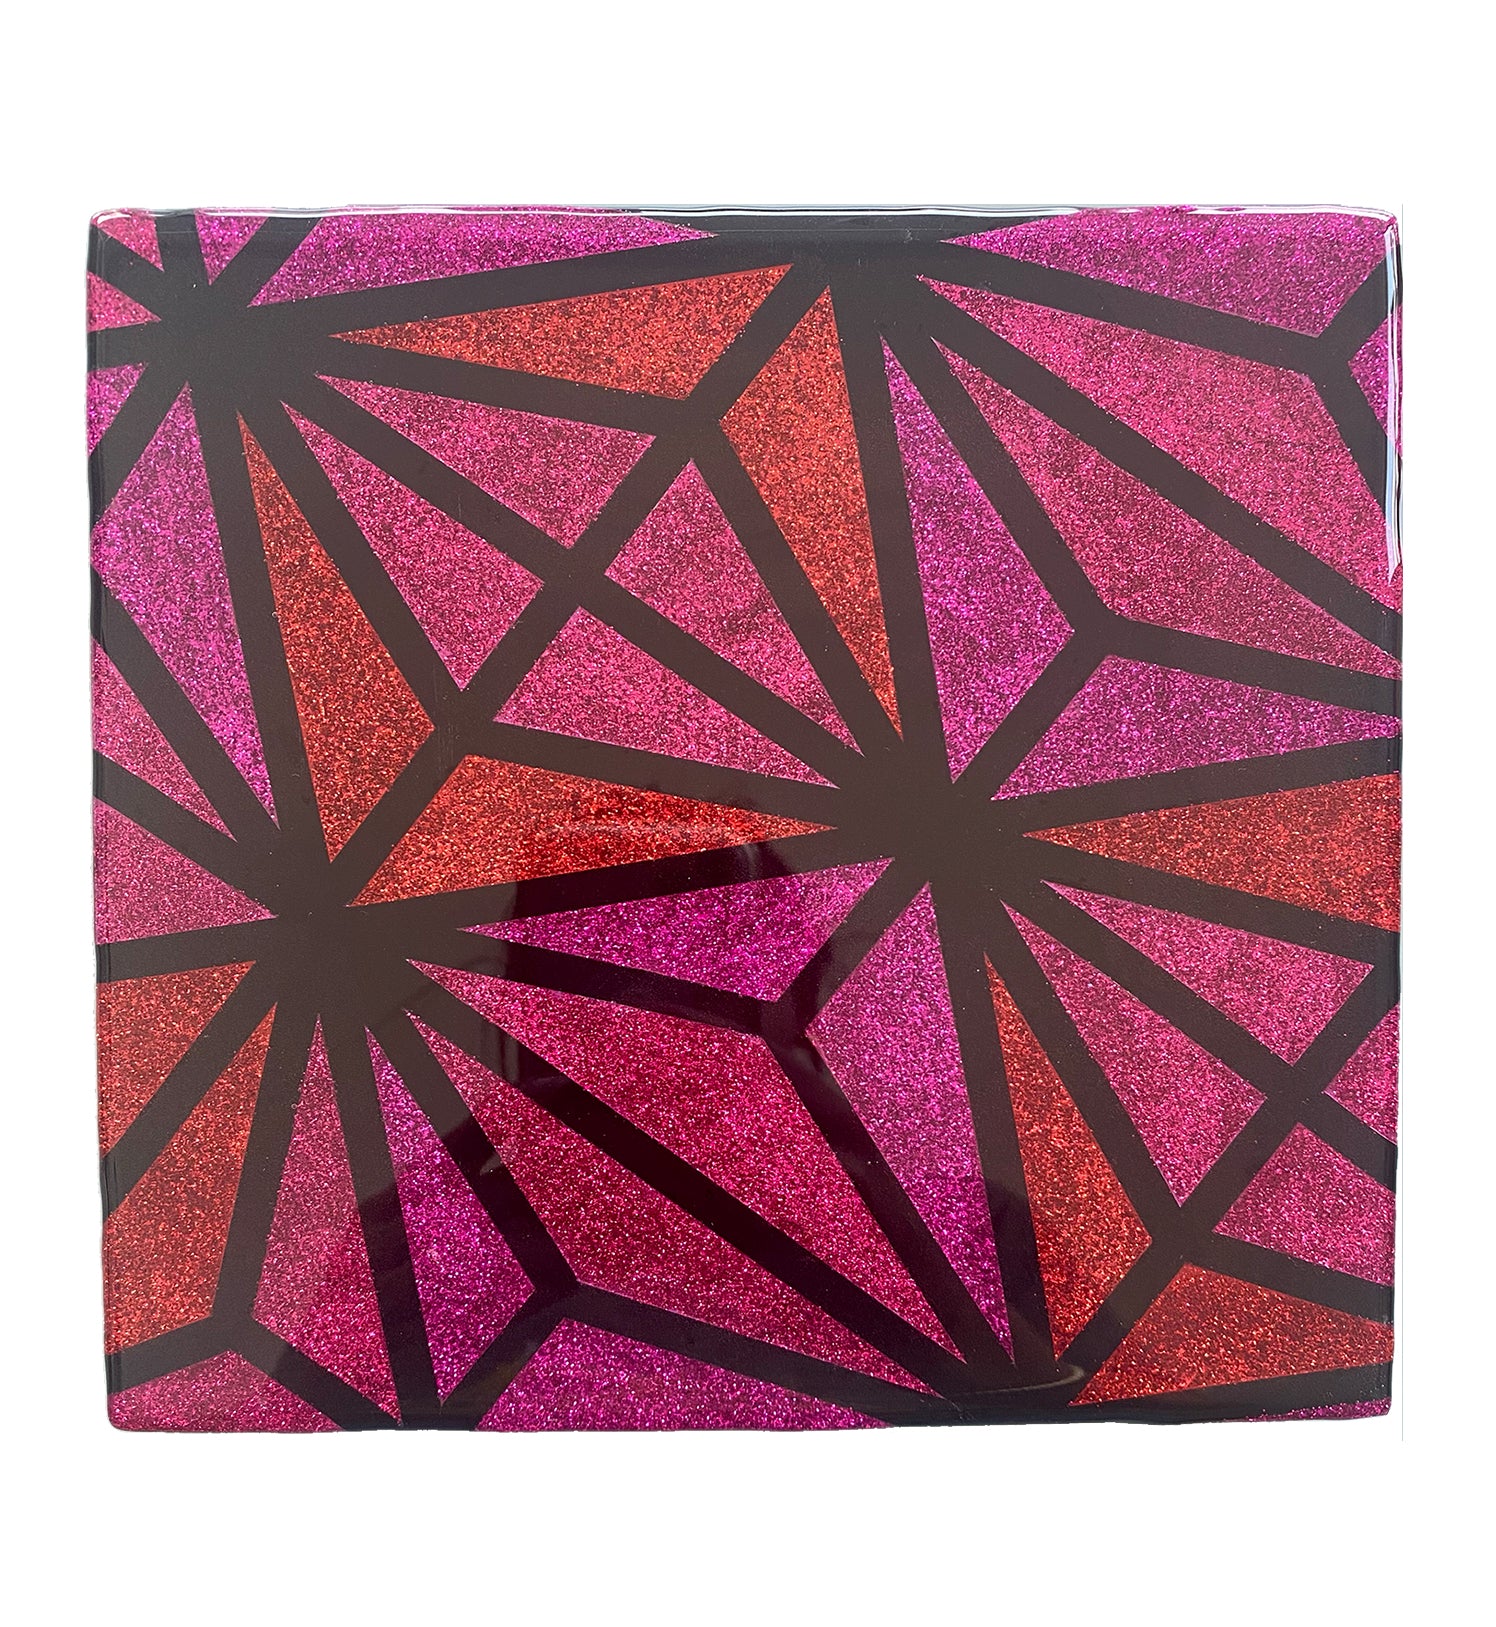 Pink Glitter and Media Devils May Geometric – Art Care Wall Resin Mixed Triangles